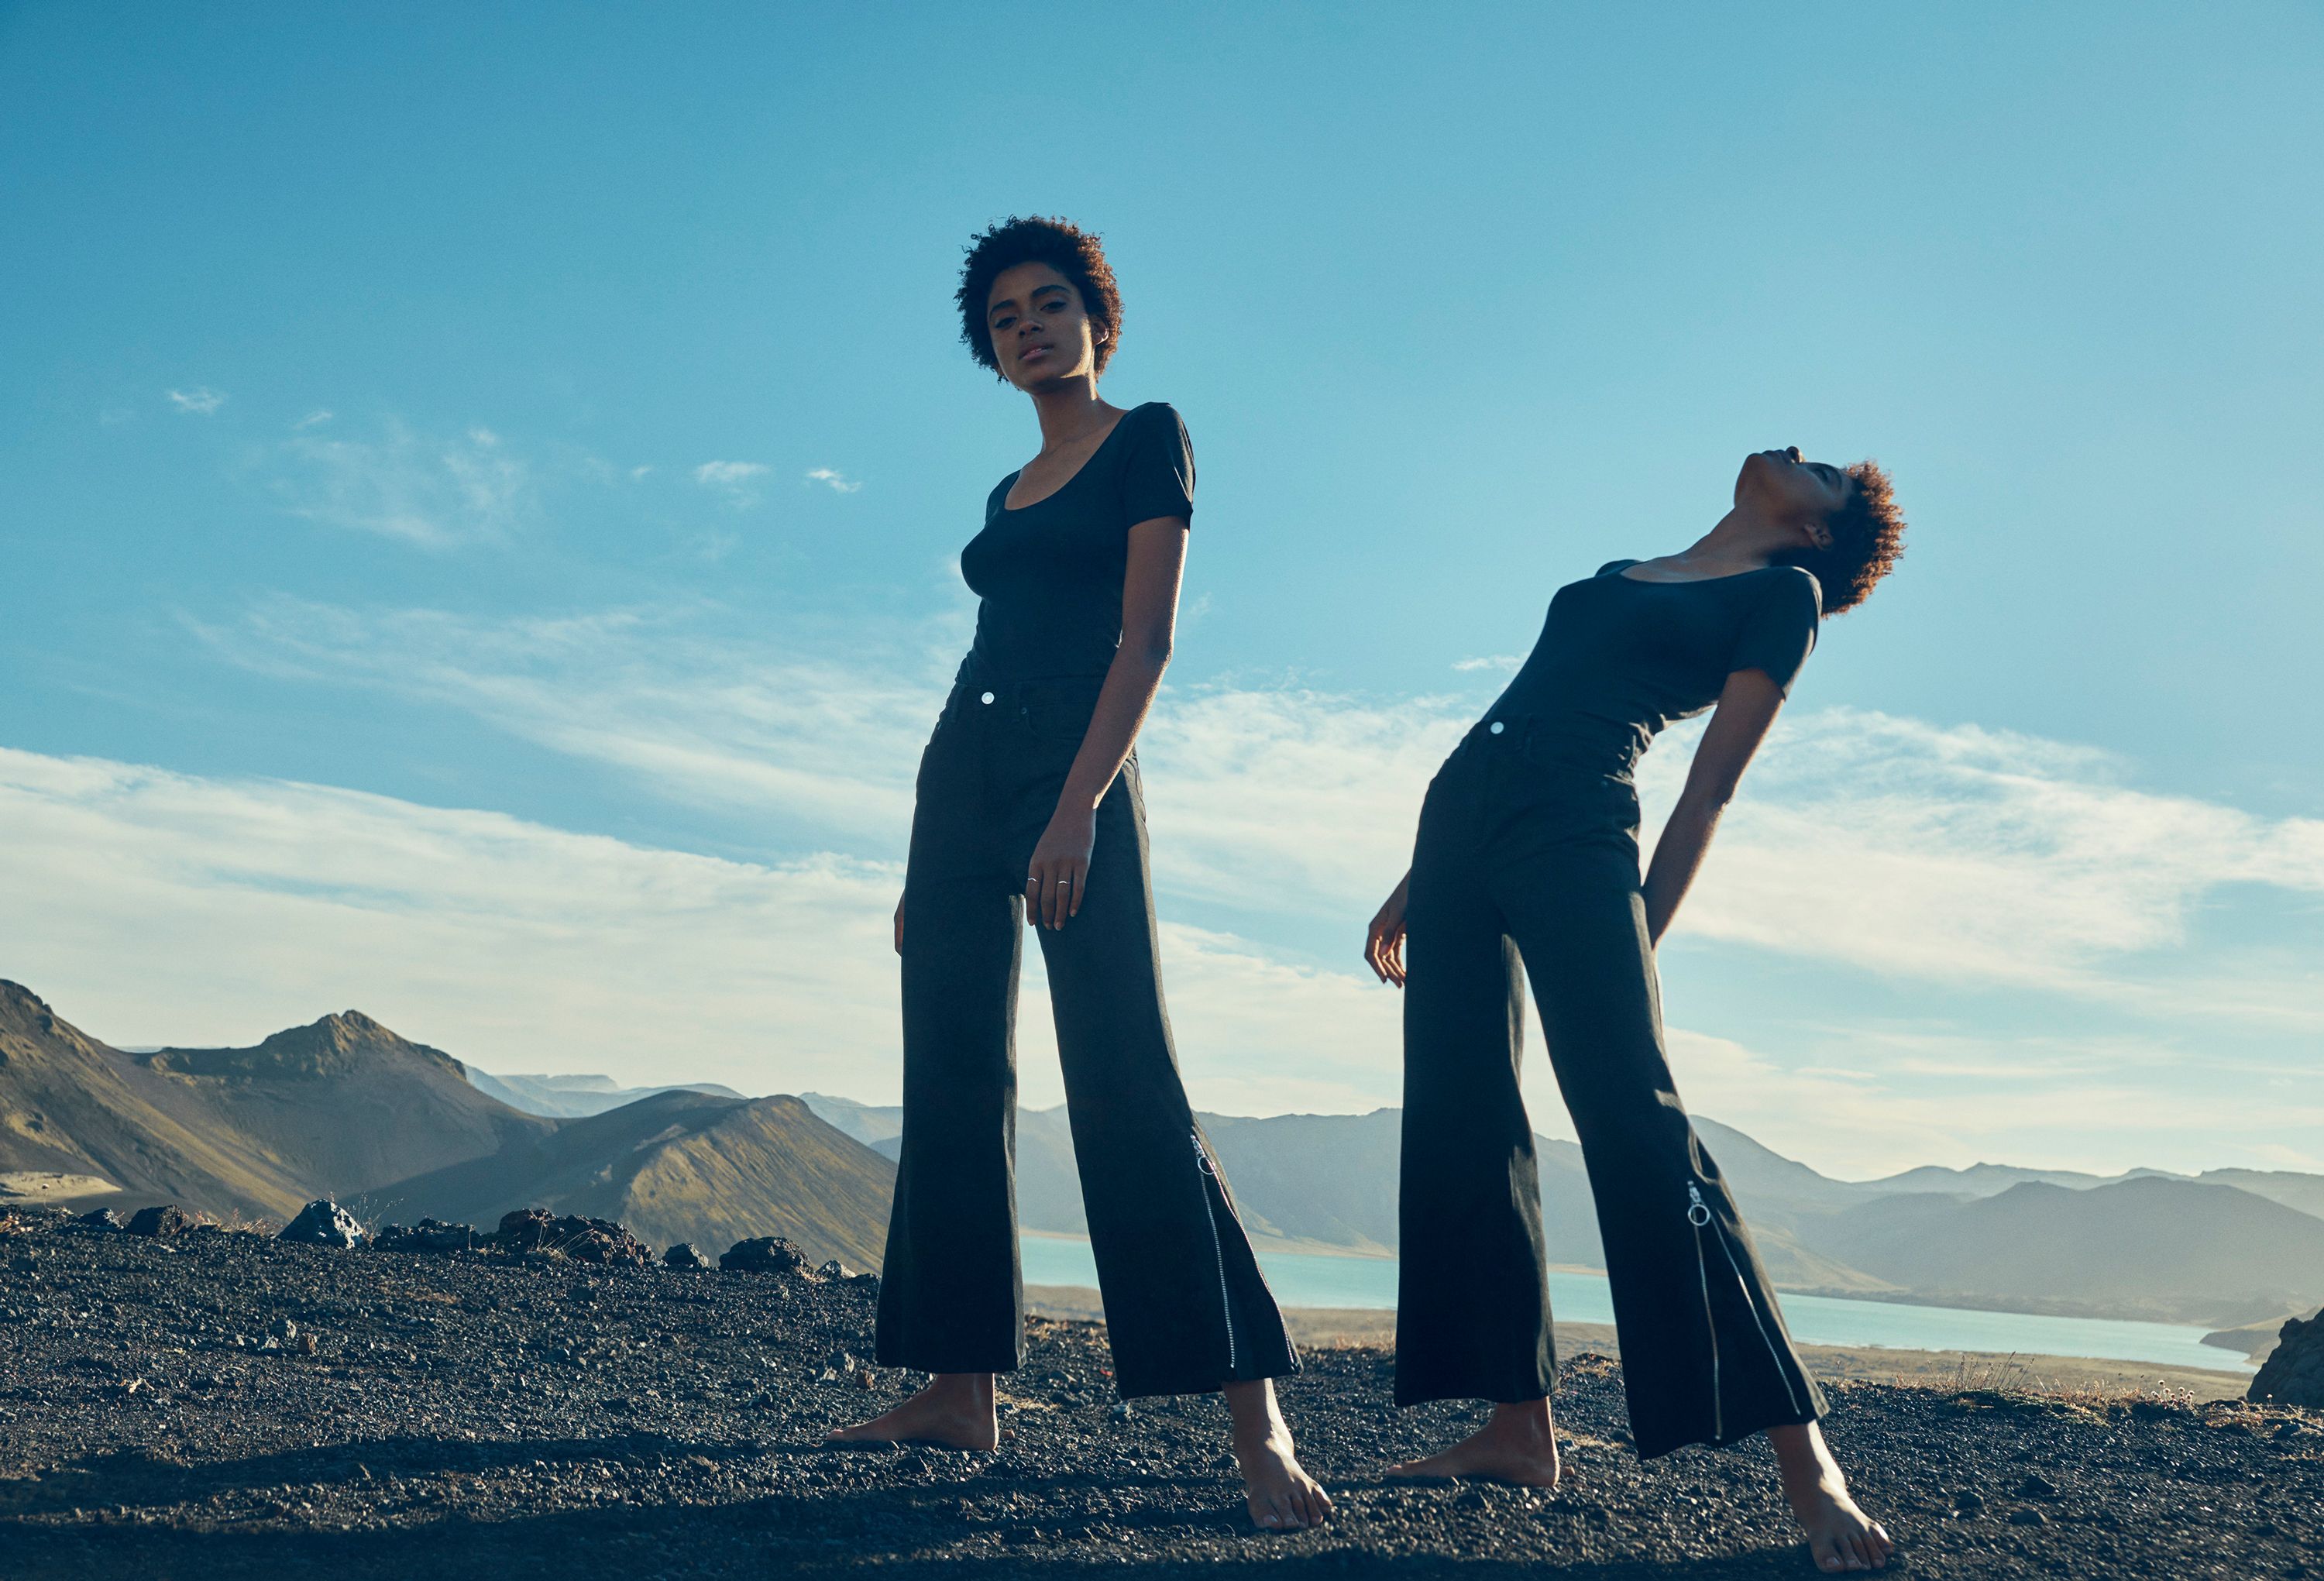 h&m’s latest collection is proof fast-fashion can be sustainable